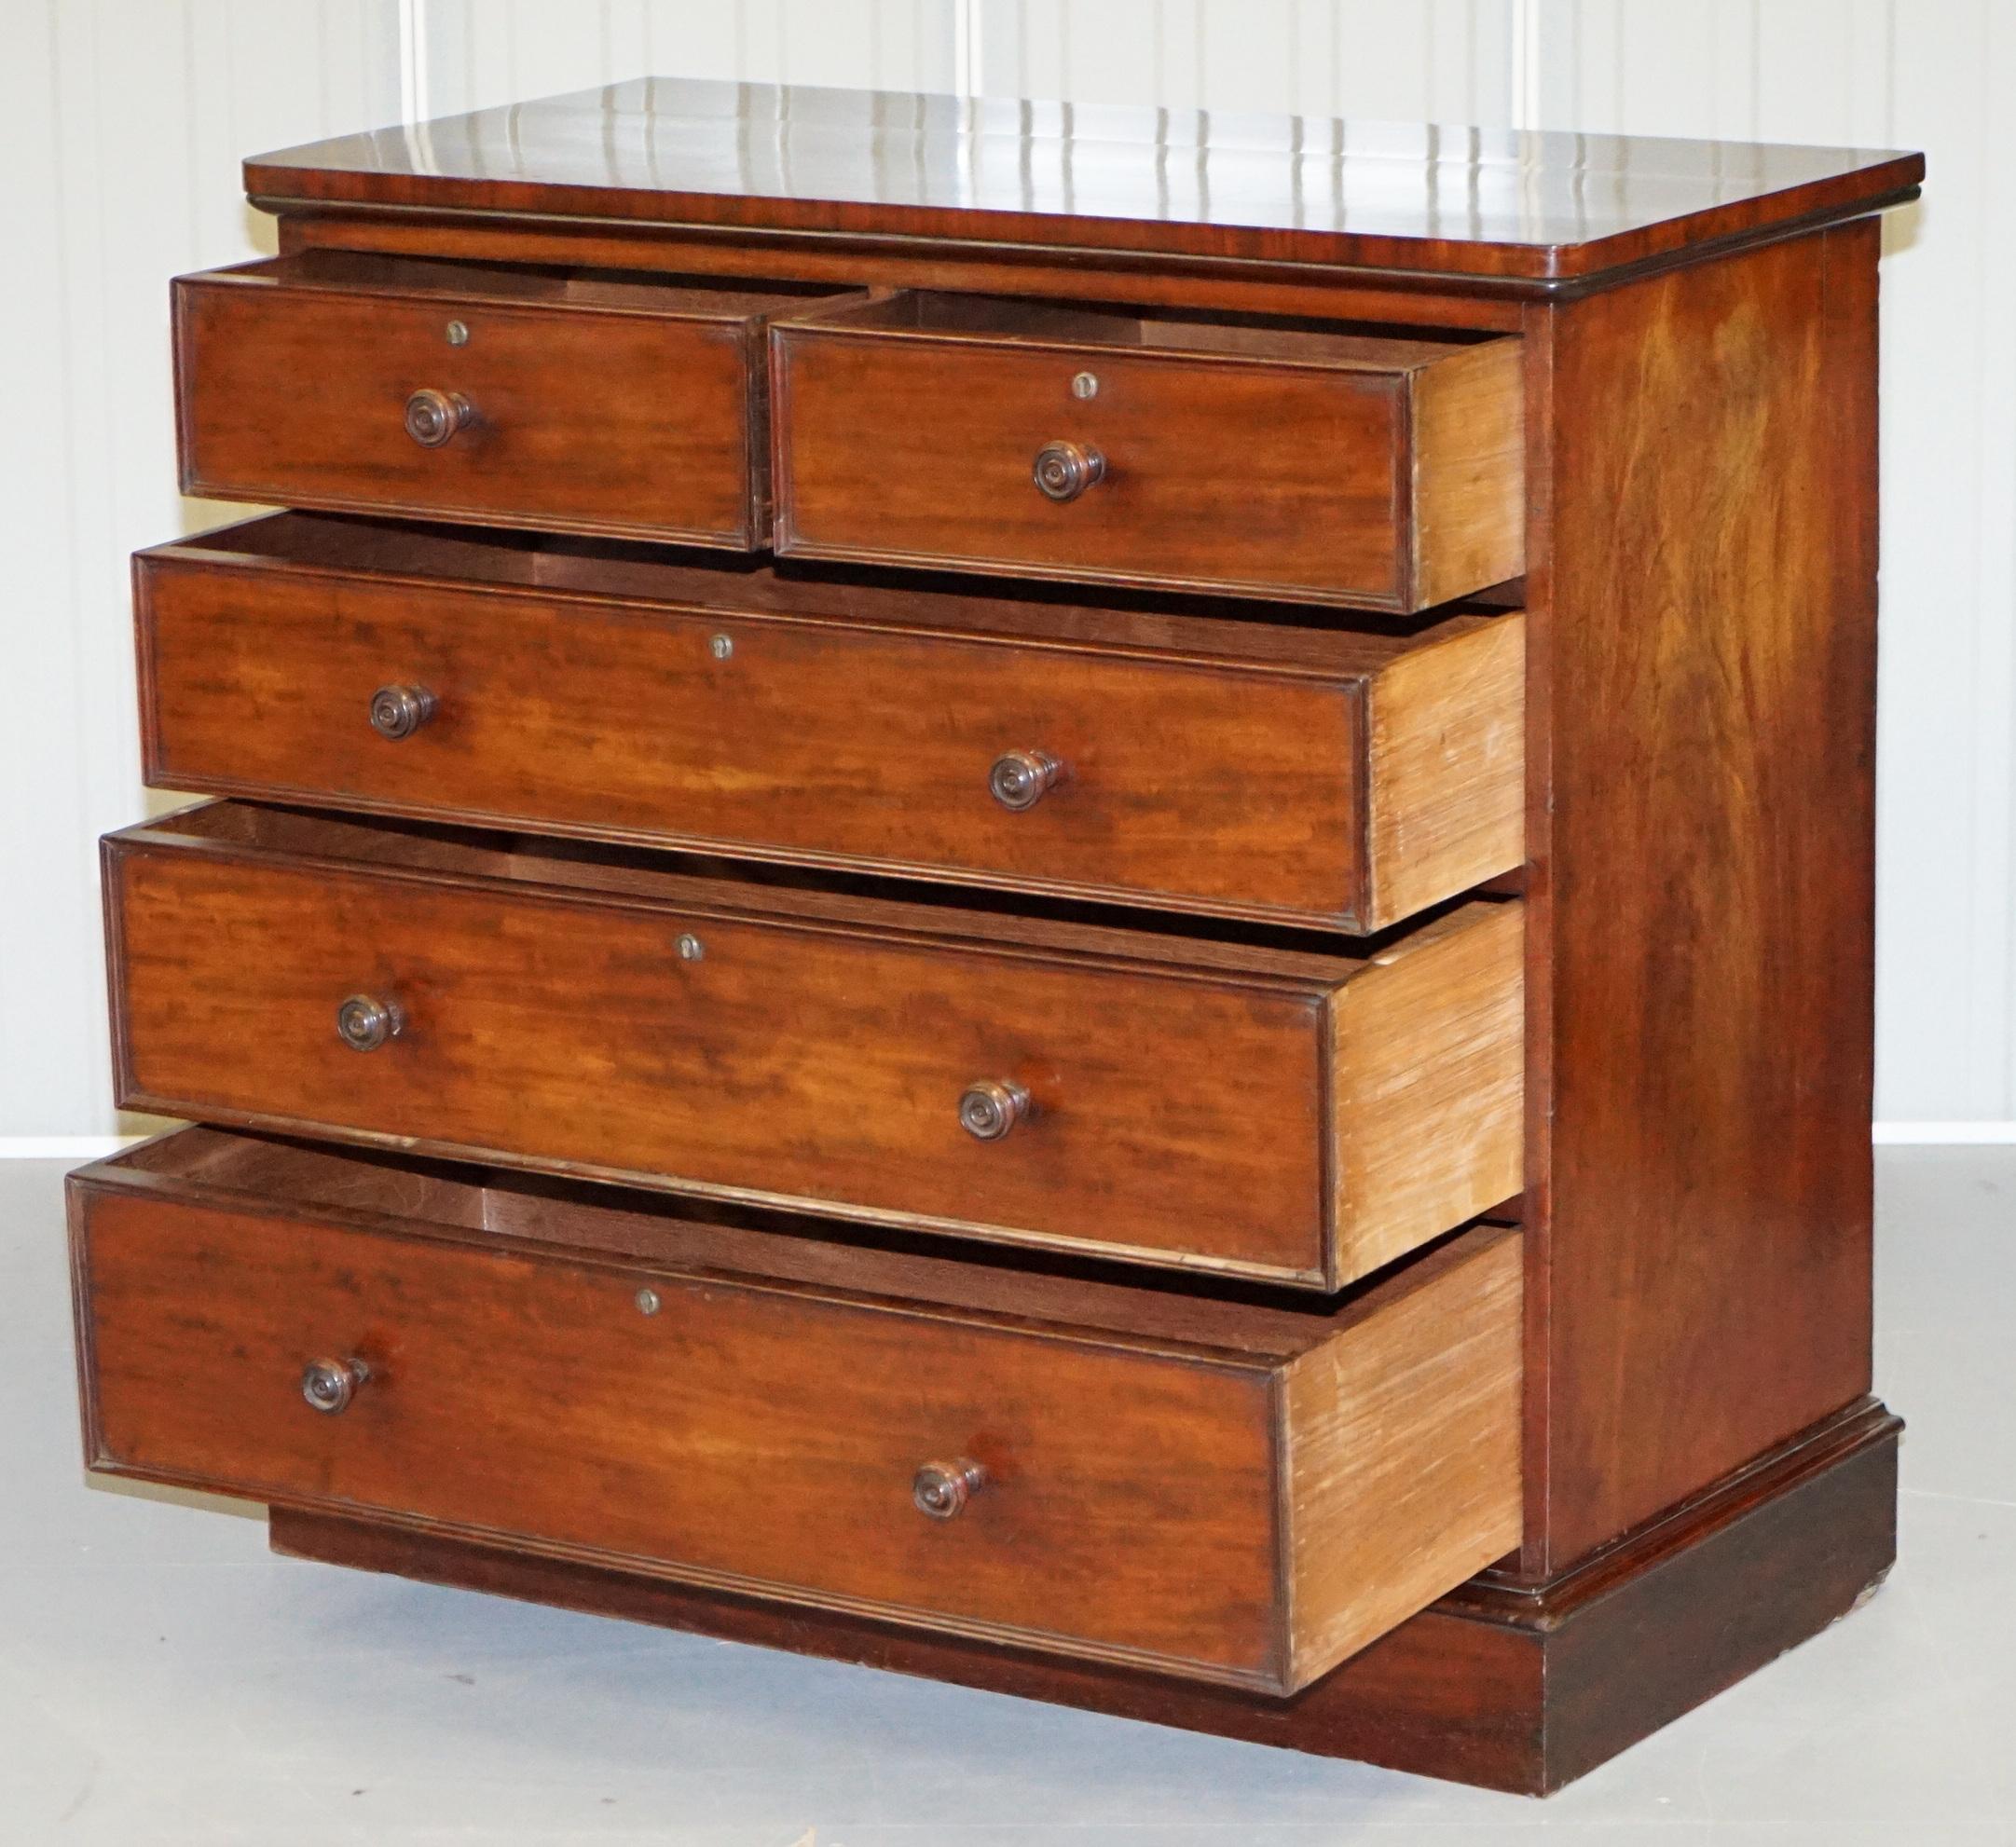 Rare circa 1760 Thomas Wilson 68 Great Queen Street Hardwood Chest of Drawers For Sale 10